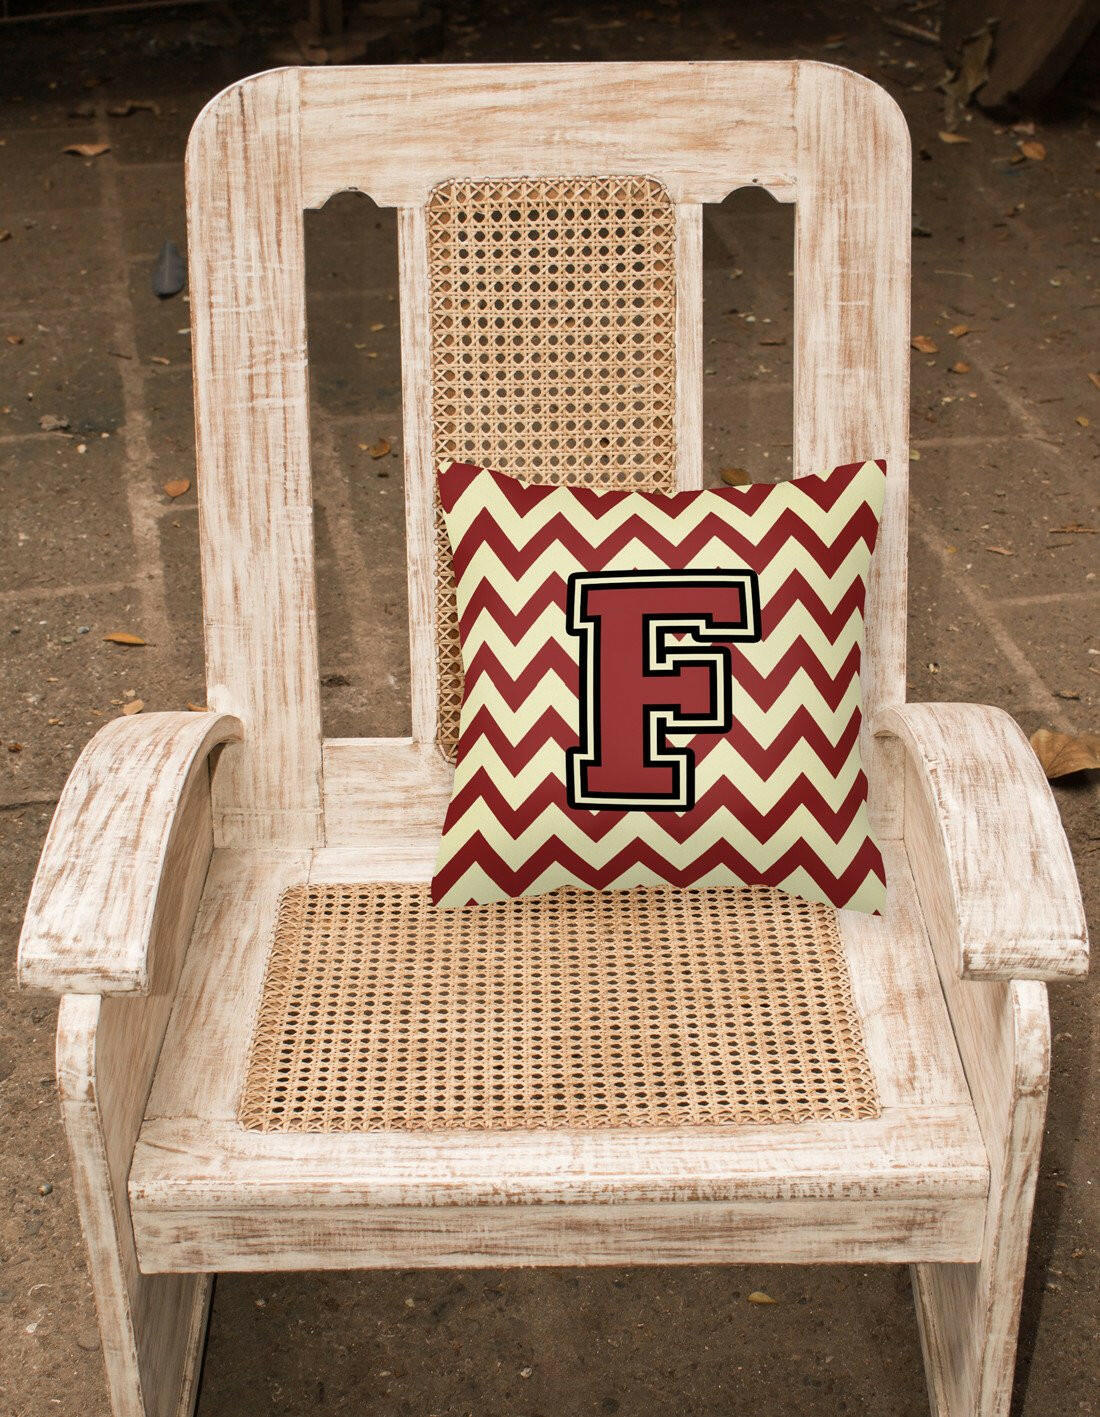 Letter F Chevron Maroon and Gold Fabric Decorative Pillow CJ1061-FPW1414 by Caroline's Treasures